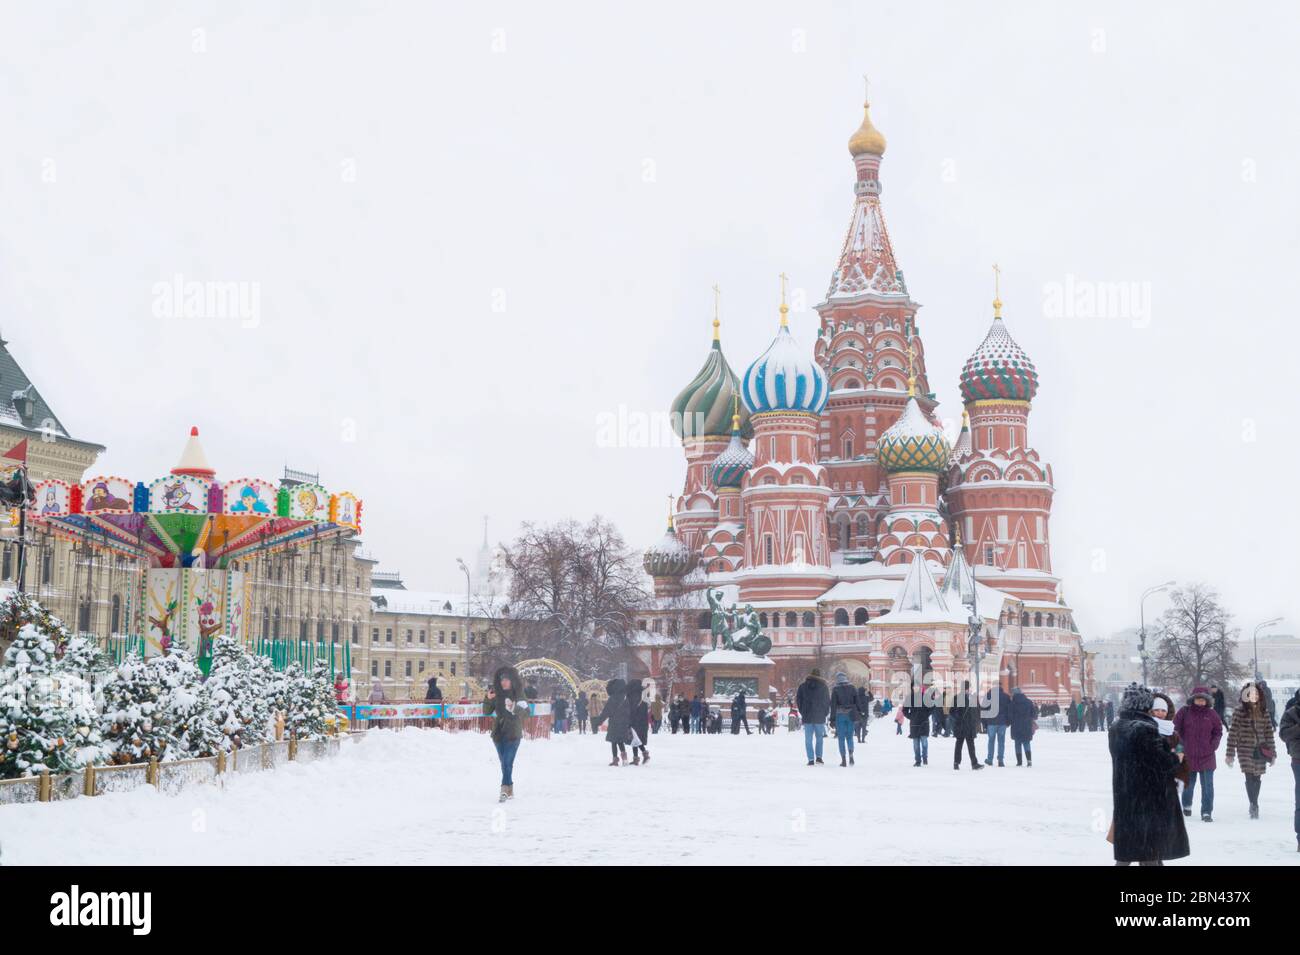 Russia, Moscow - January 27th, 2019: Heavy snowfall and low temperatures do not deter toursist from visiting the Red Square and St. Basil´s Cathedral. Stock Photo